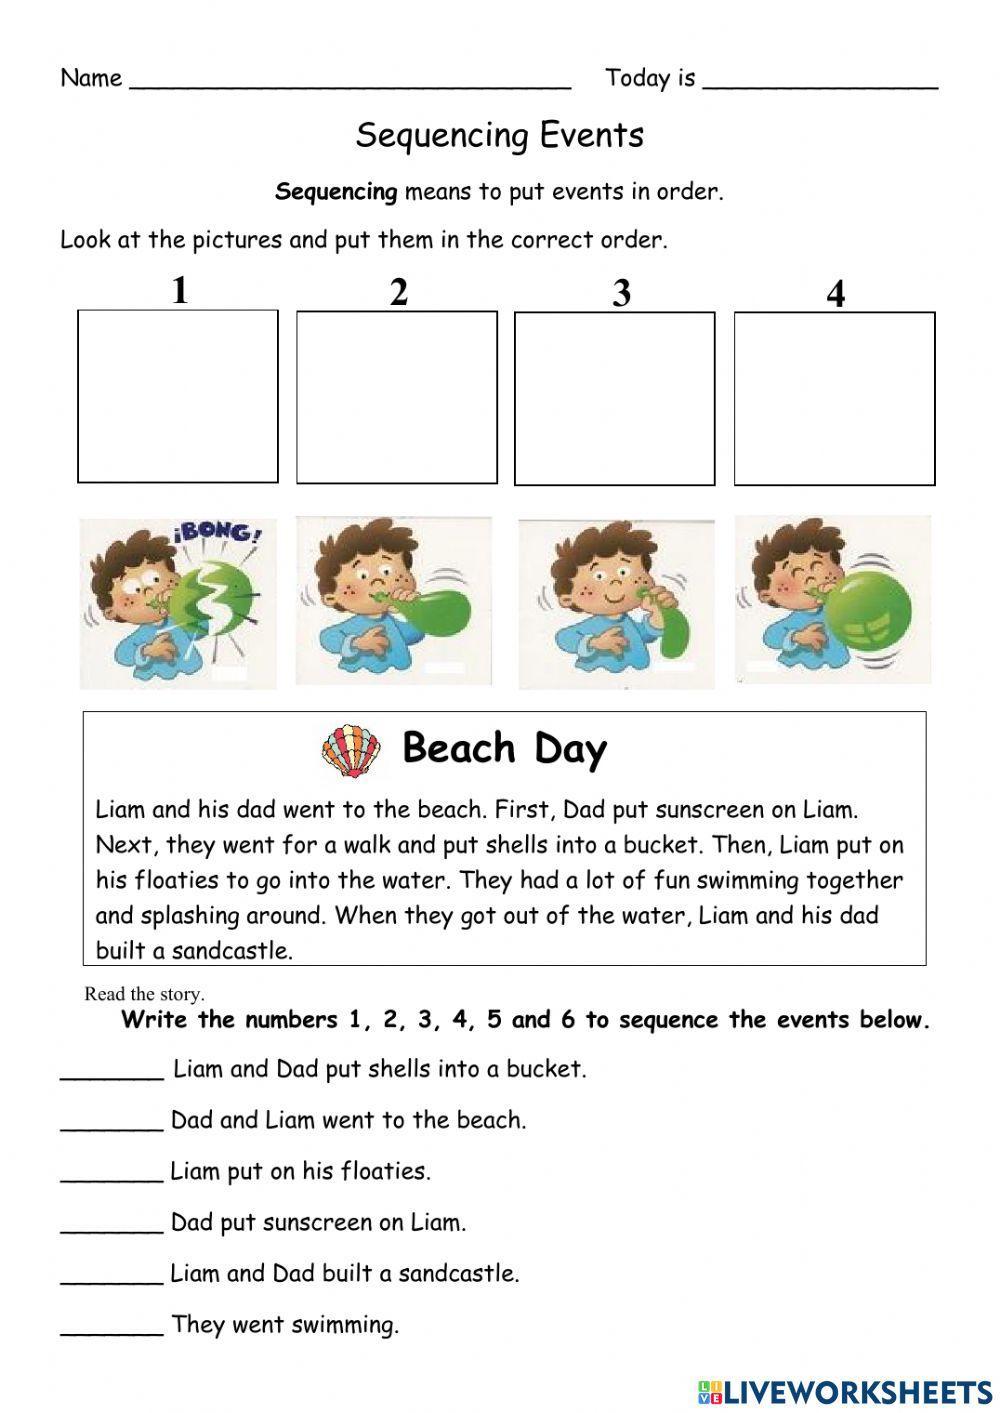 Sequencing Events Worksheet - Reading